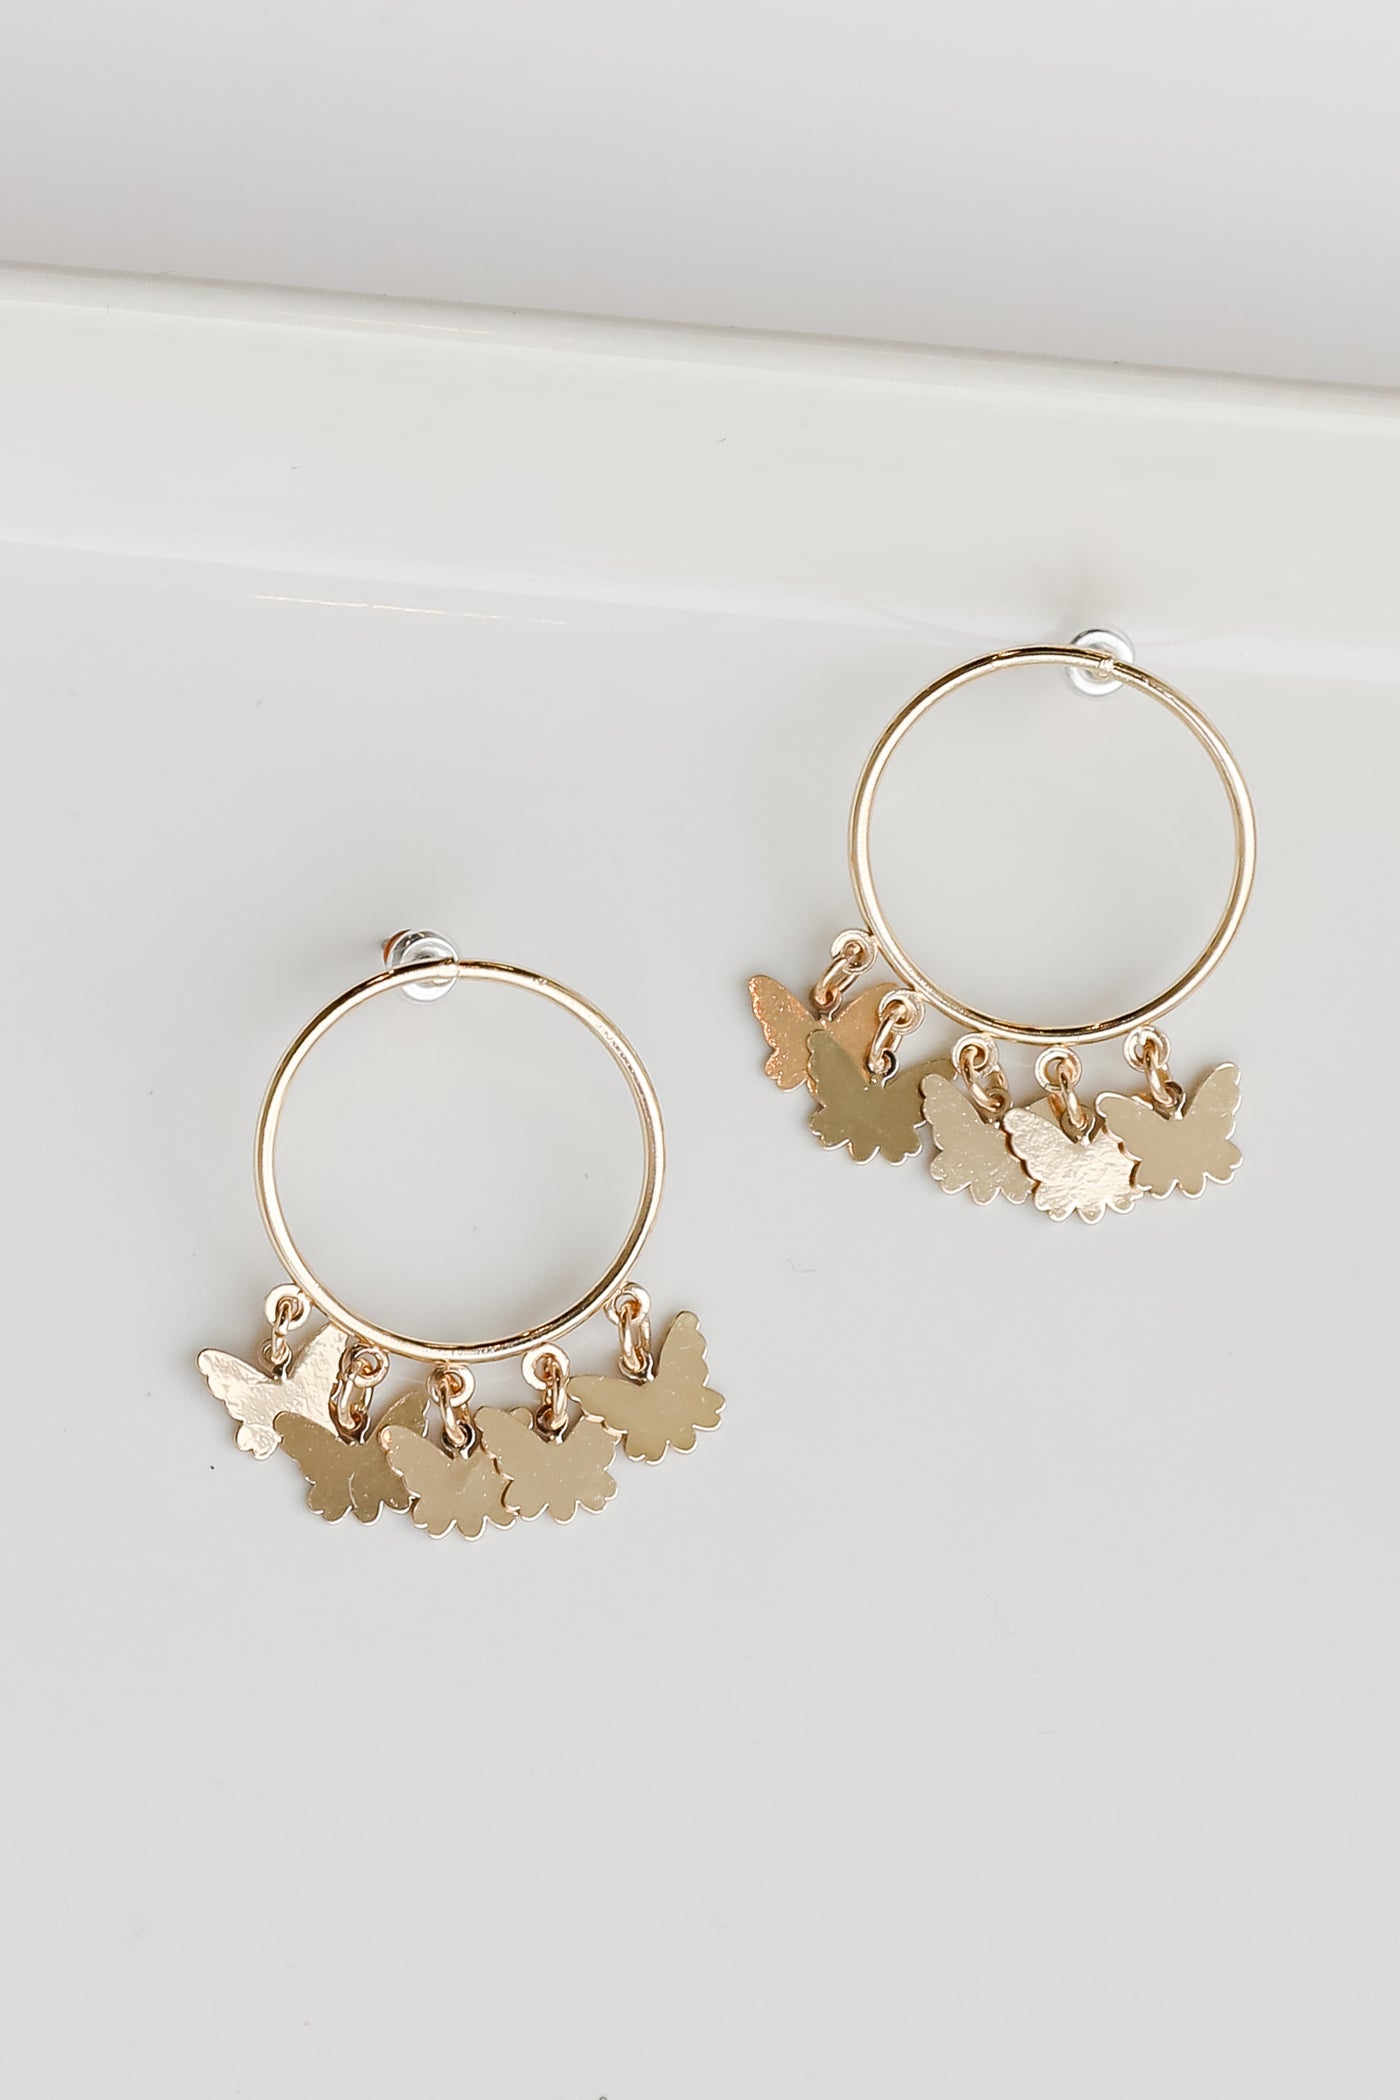 Gold Butterfly Charm Earrings from dress up